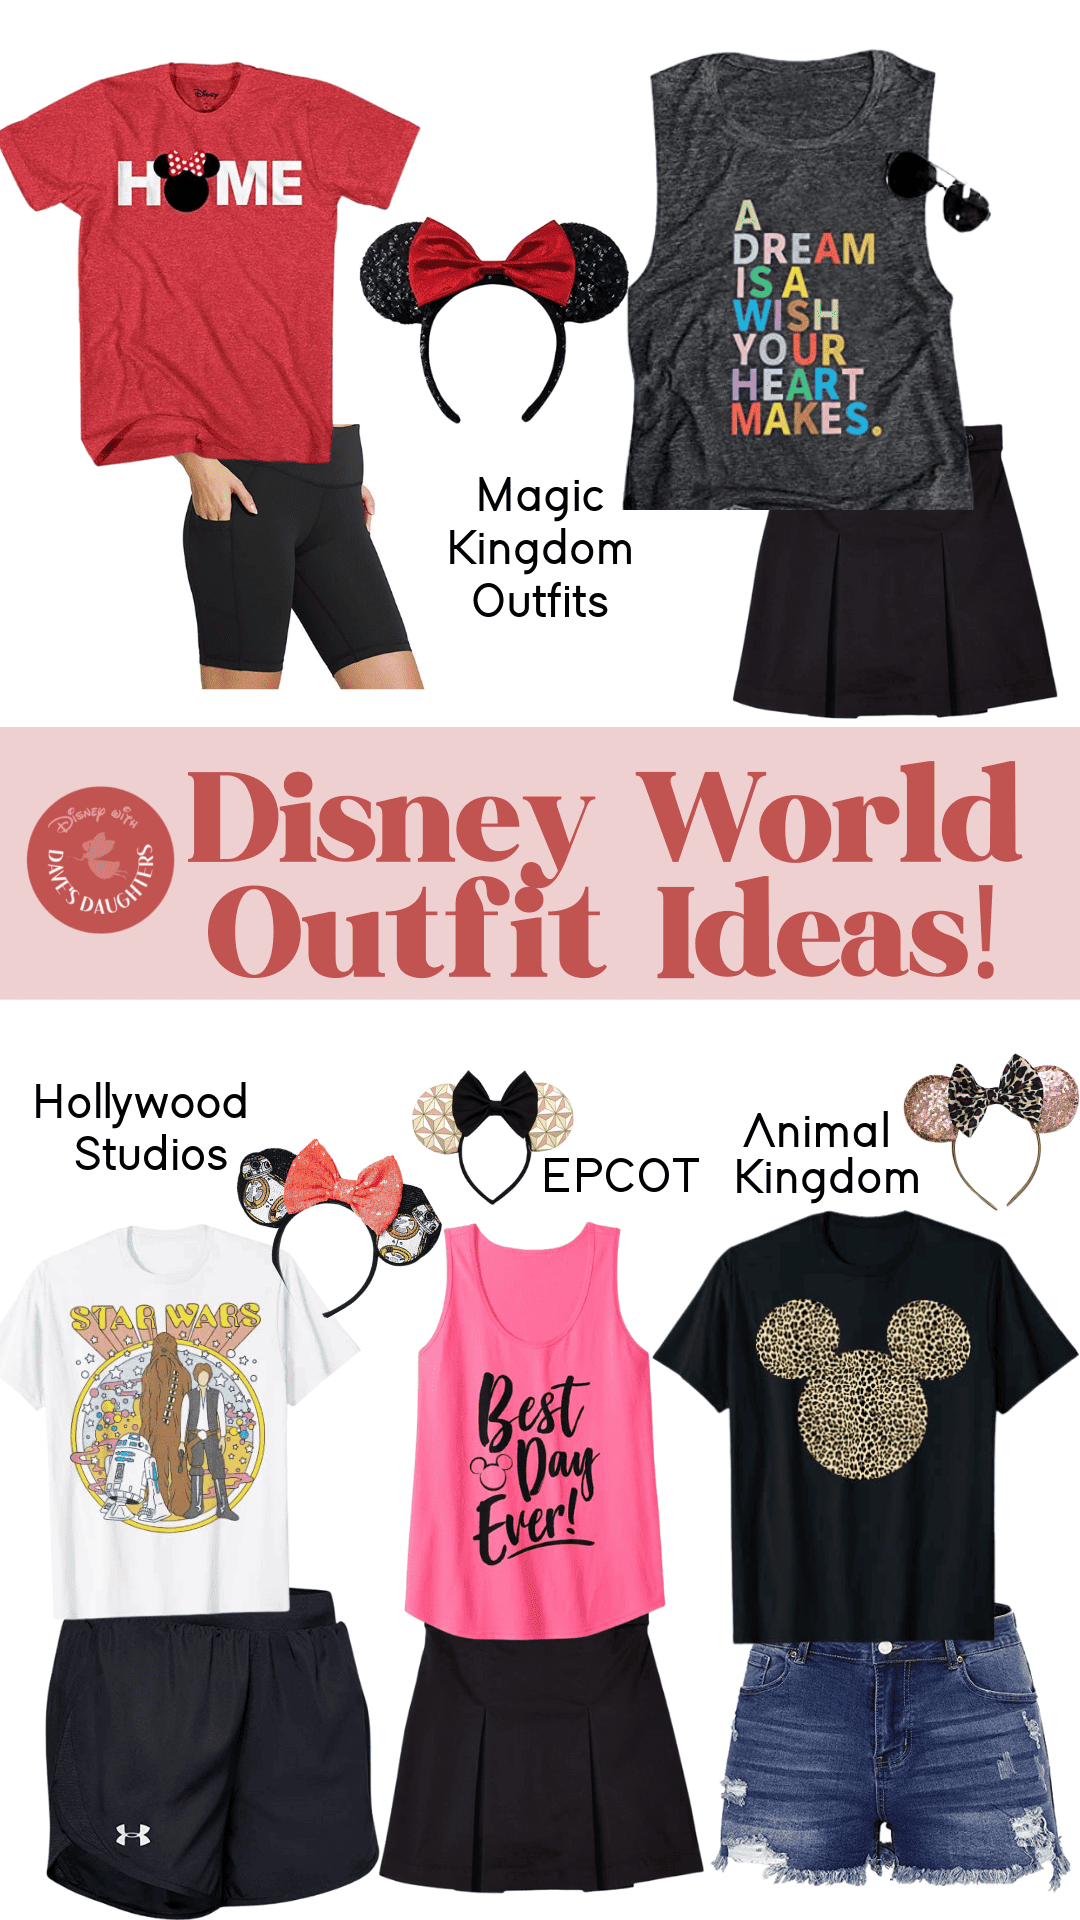 5 Disney World Outfit Ideas for Women for Summer - Disney With Dave's  Daughters